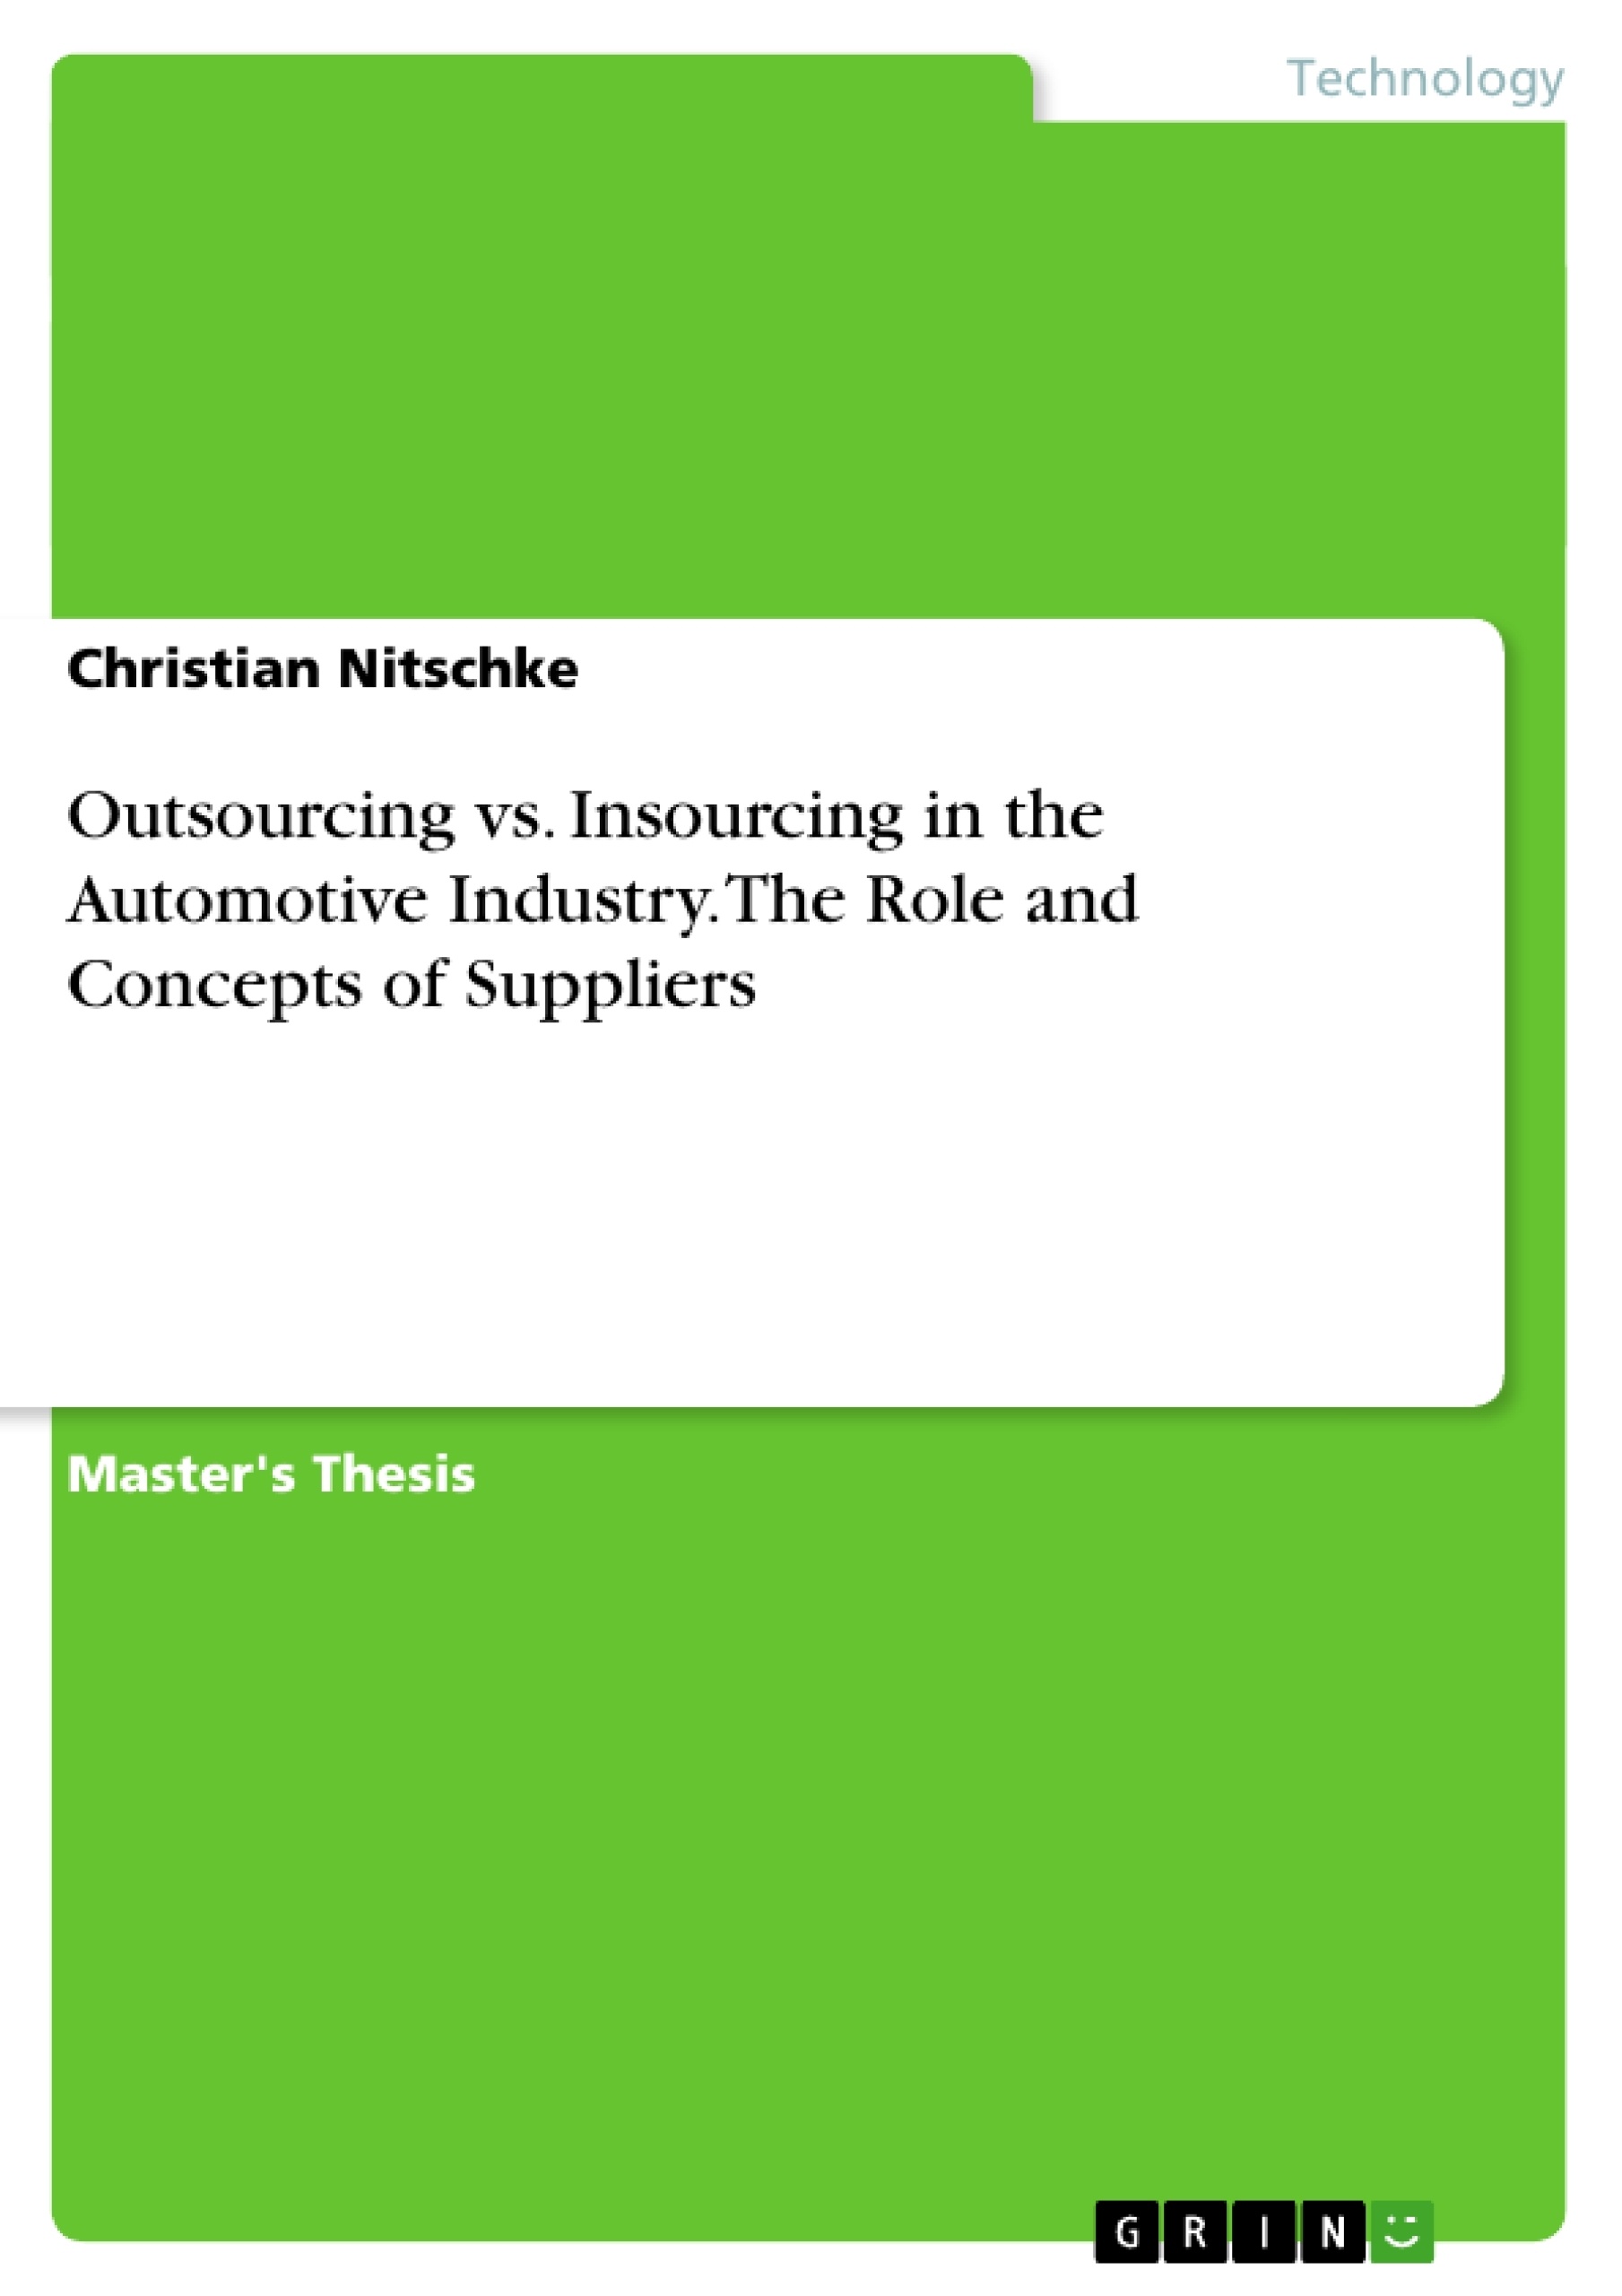 Title: Outsourcing vs. Insourcing in the Automotive Industry. The Role and Concepts of Suppliers